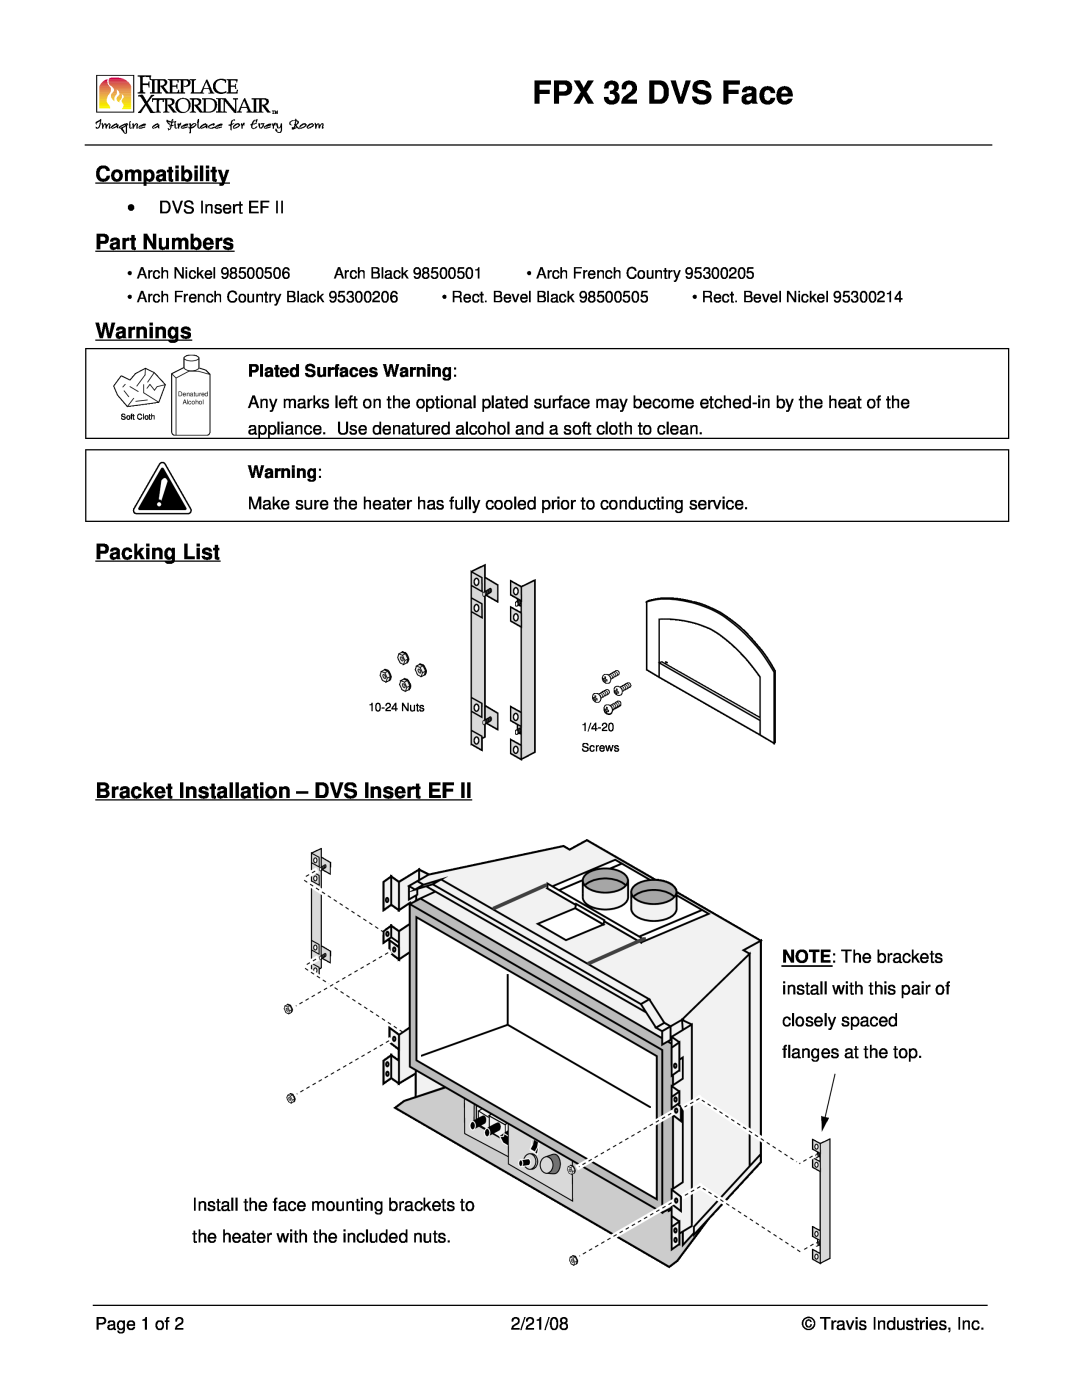 FireplaceXtrordinair manual FPX 32 DVS Face, Compatibility, Part Numbers, Warnings, Packing List 